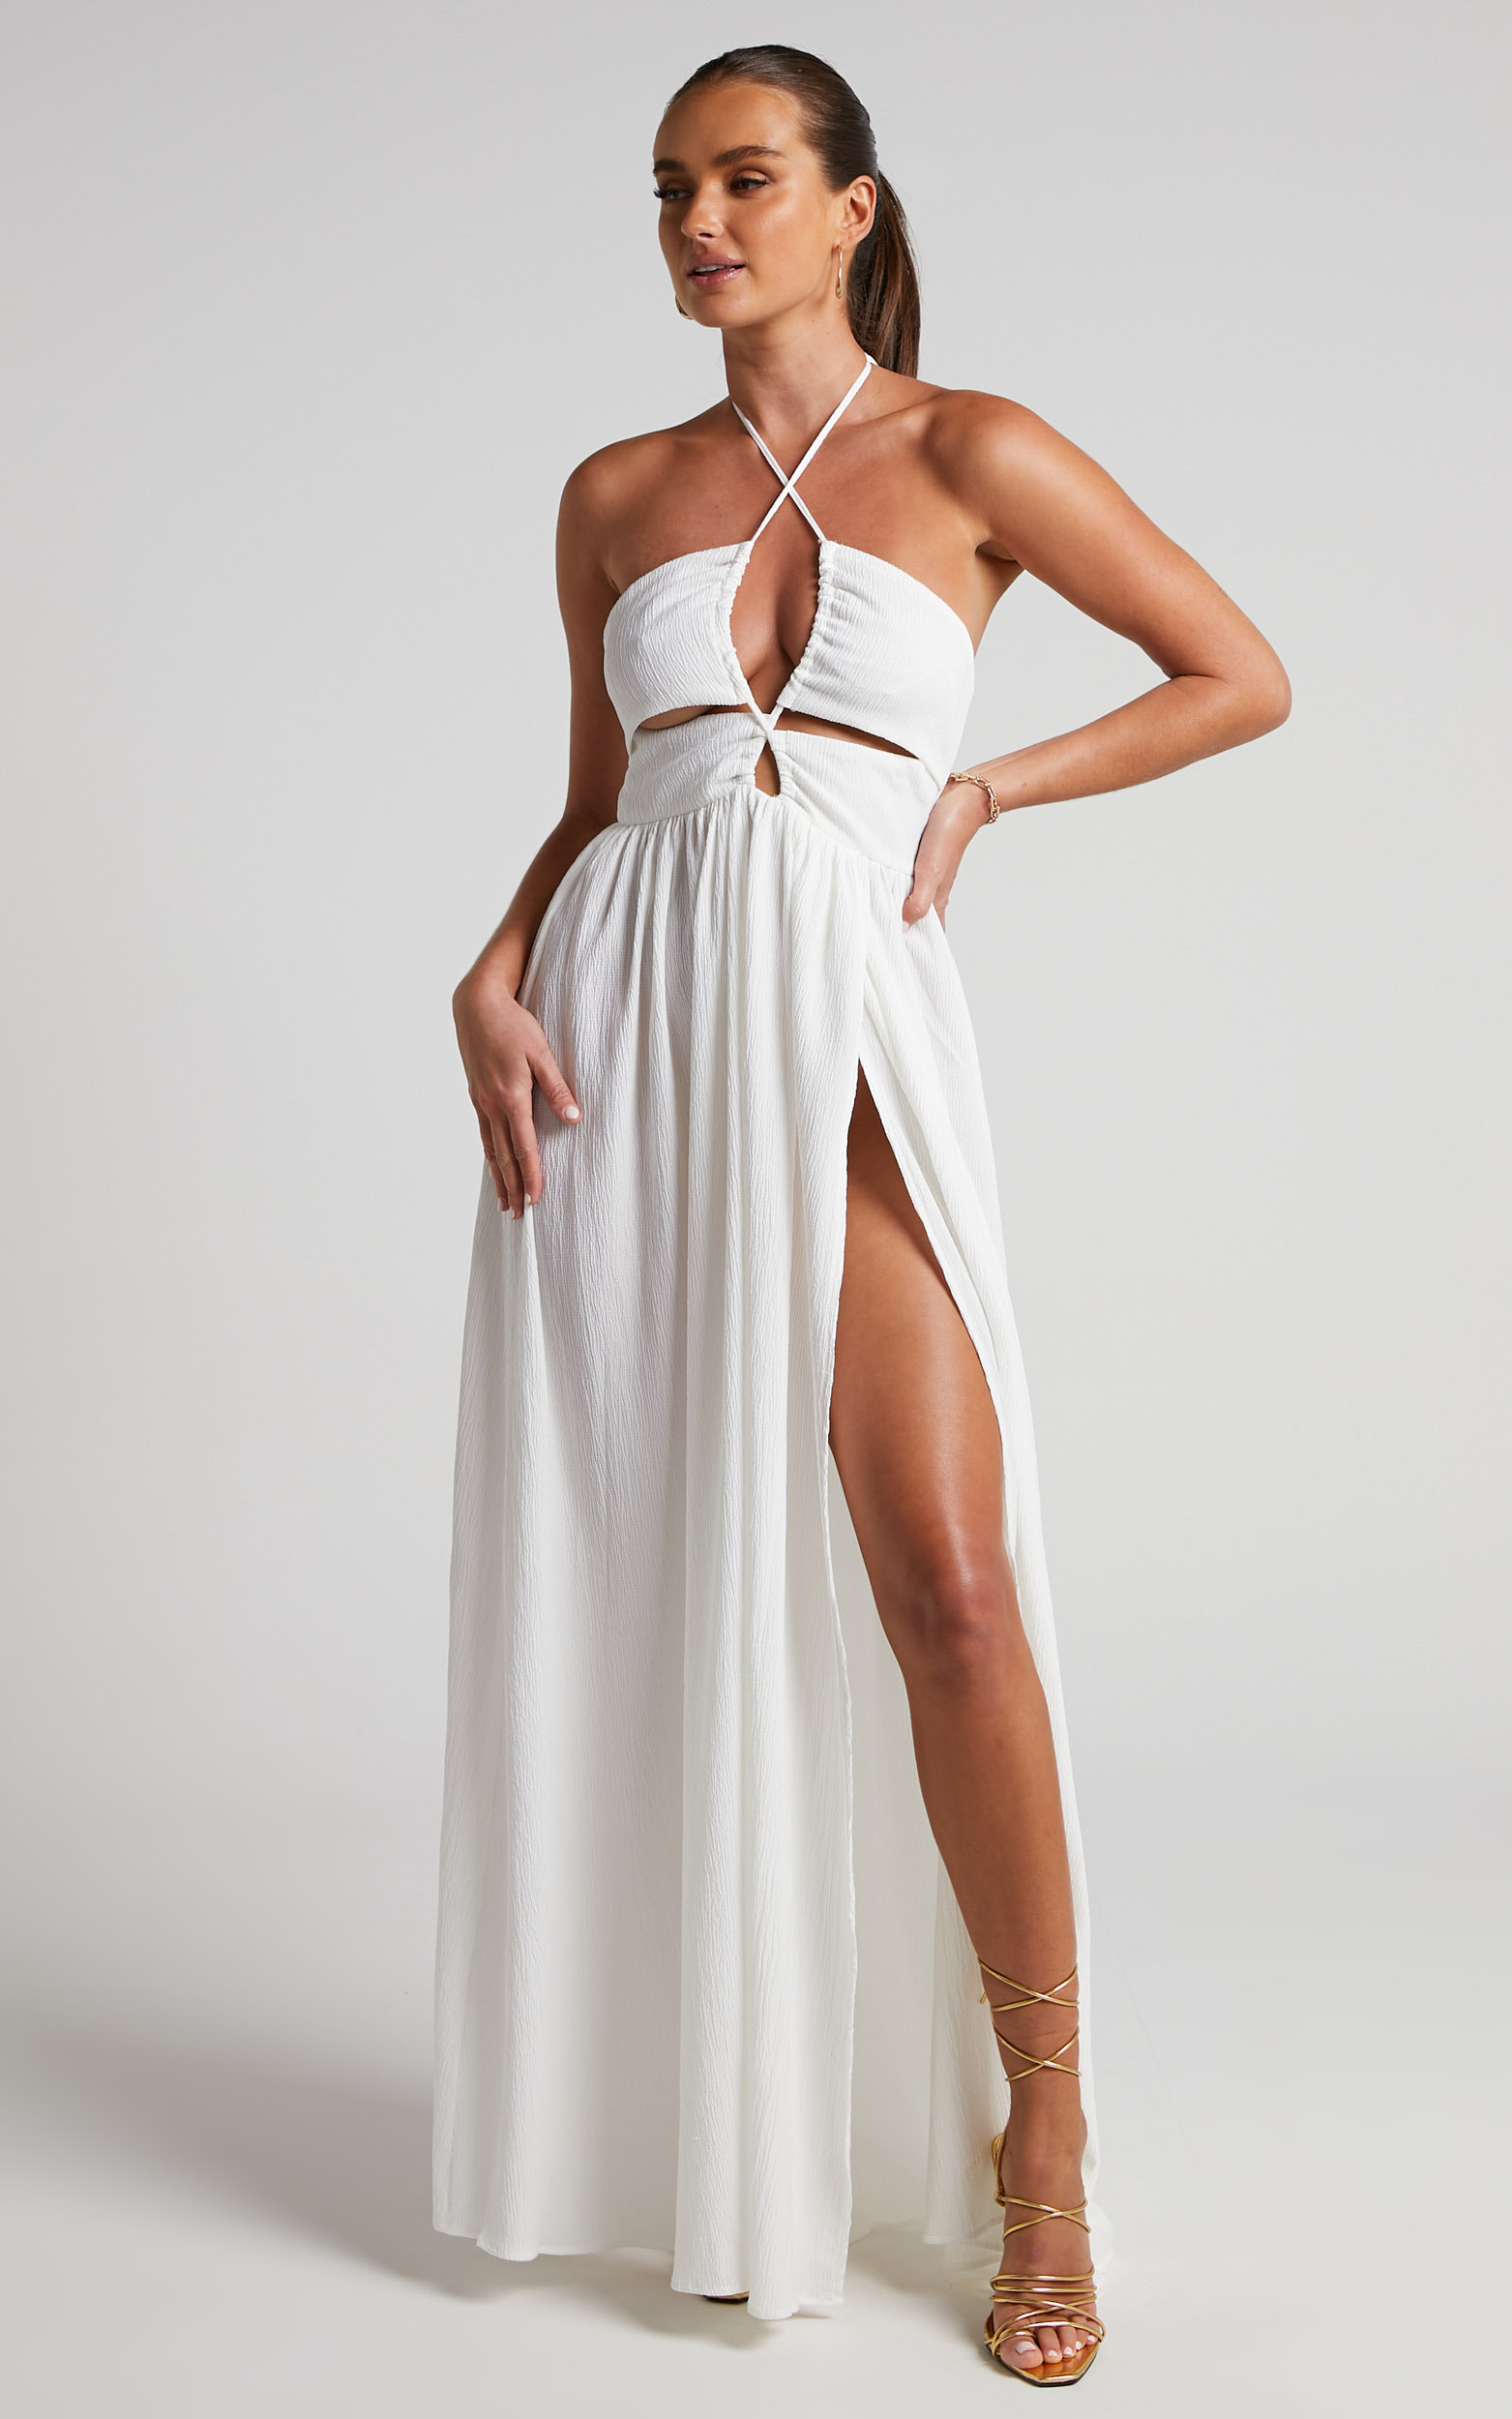 Isabeau Maxi Dress - High Slit Strappy Halter Dress in White - 06, WHT1, hi-res image number null